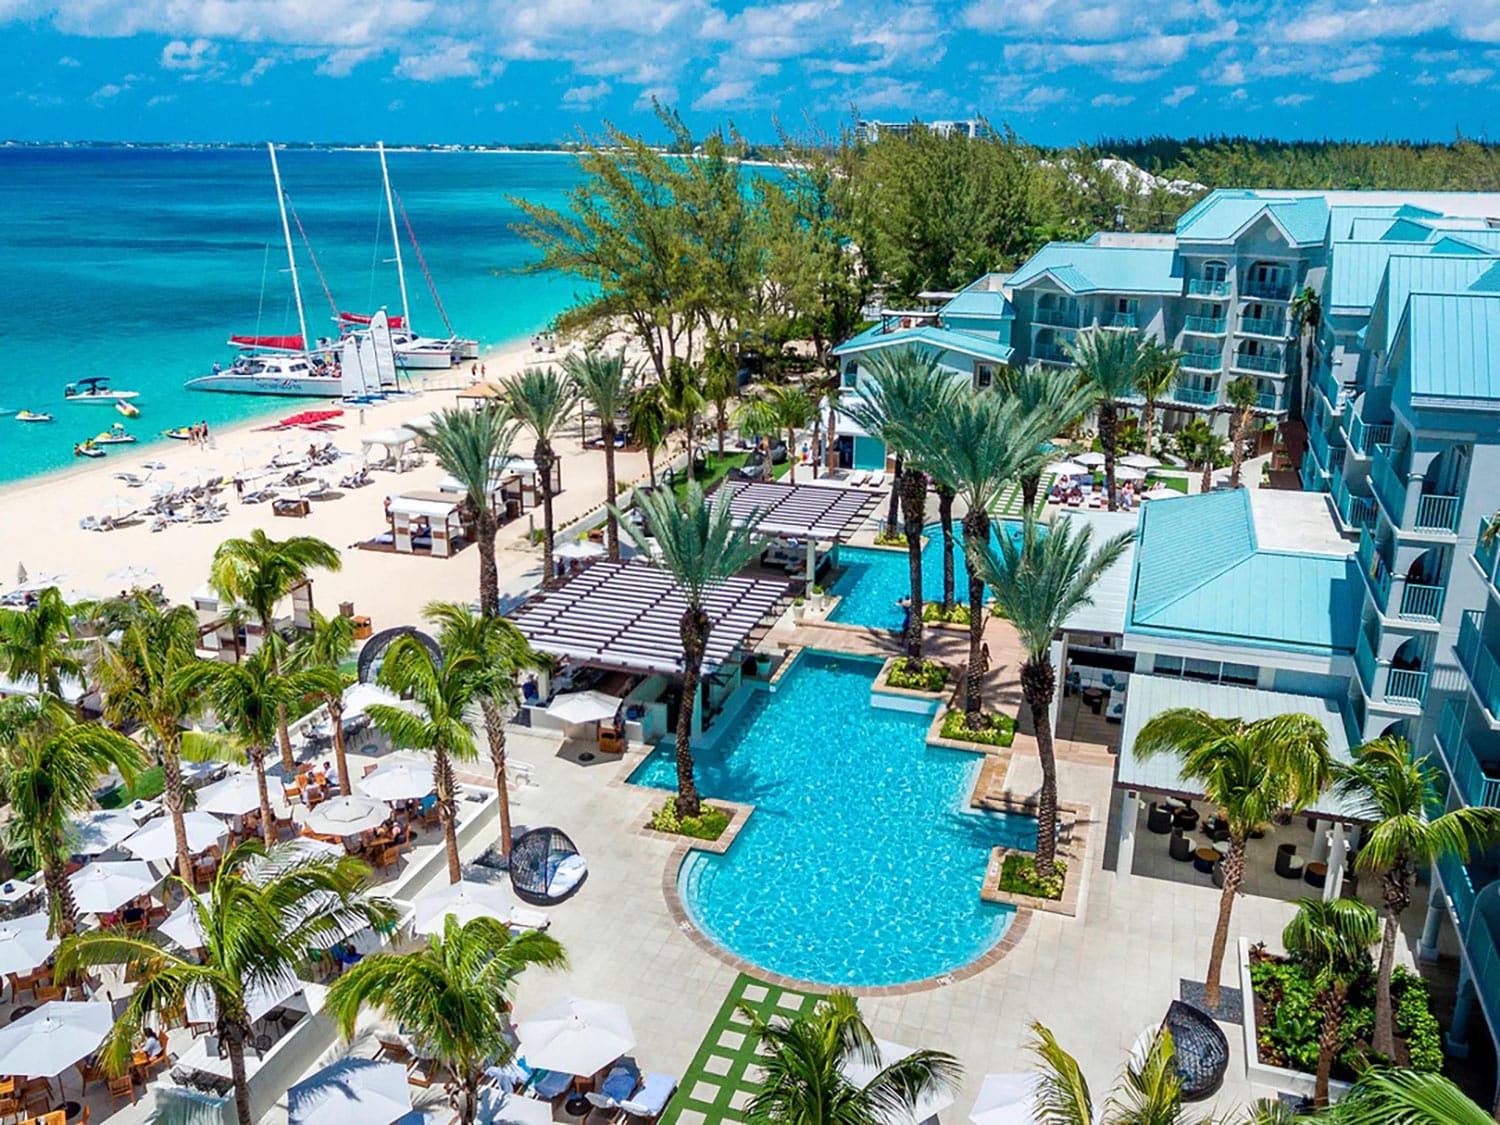 An aerial view of the pool and property at Westin Grand Cayman Seven Mile Beach Resort & Spa in the Cayman Islands.